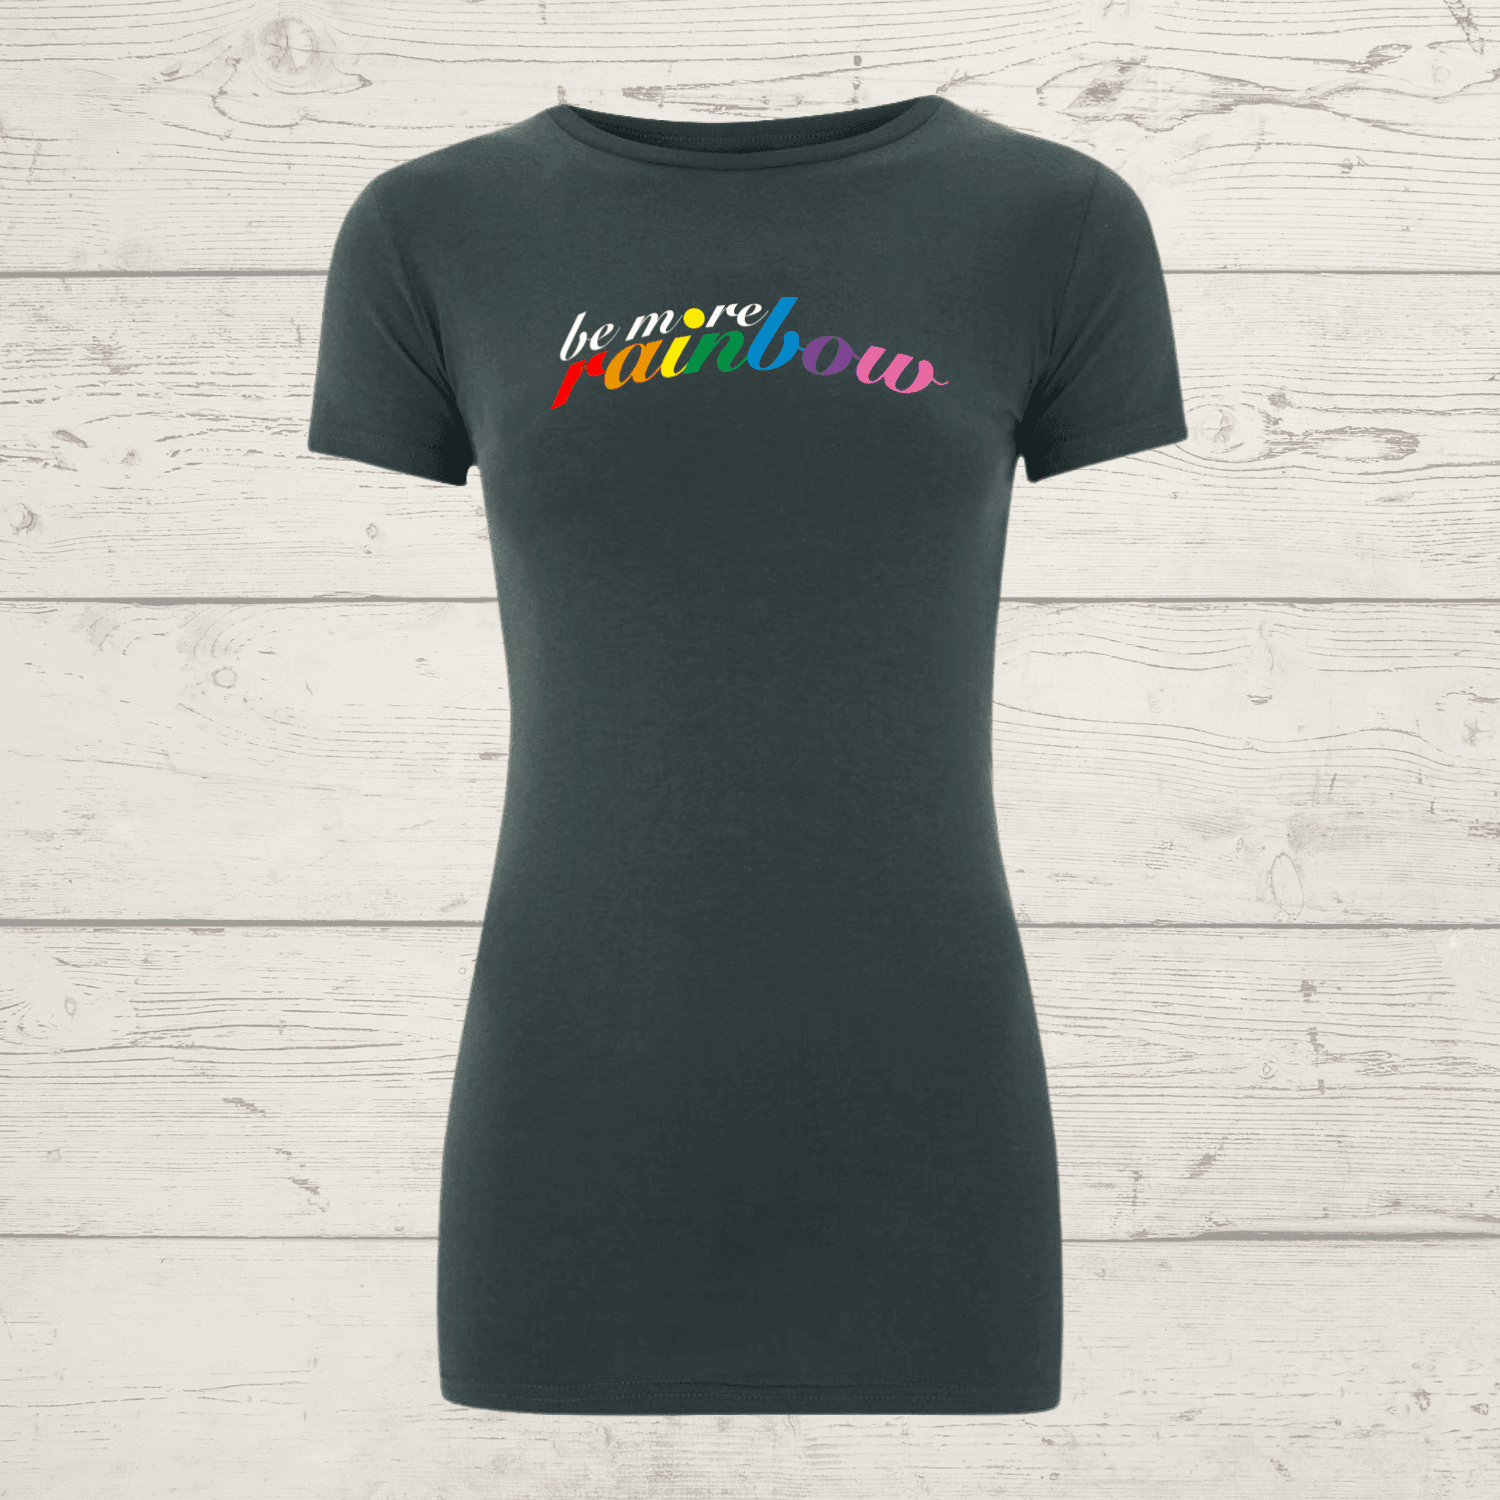 Women’s earthpositive slim fit be more rainbow t-shirt -